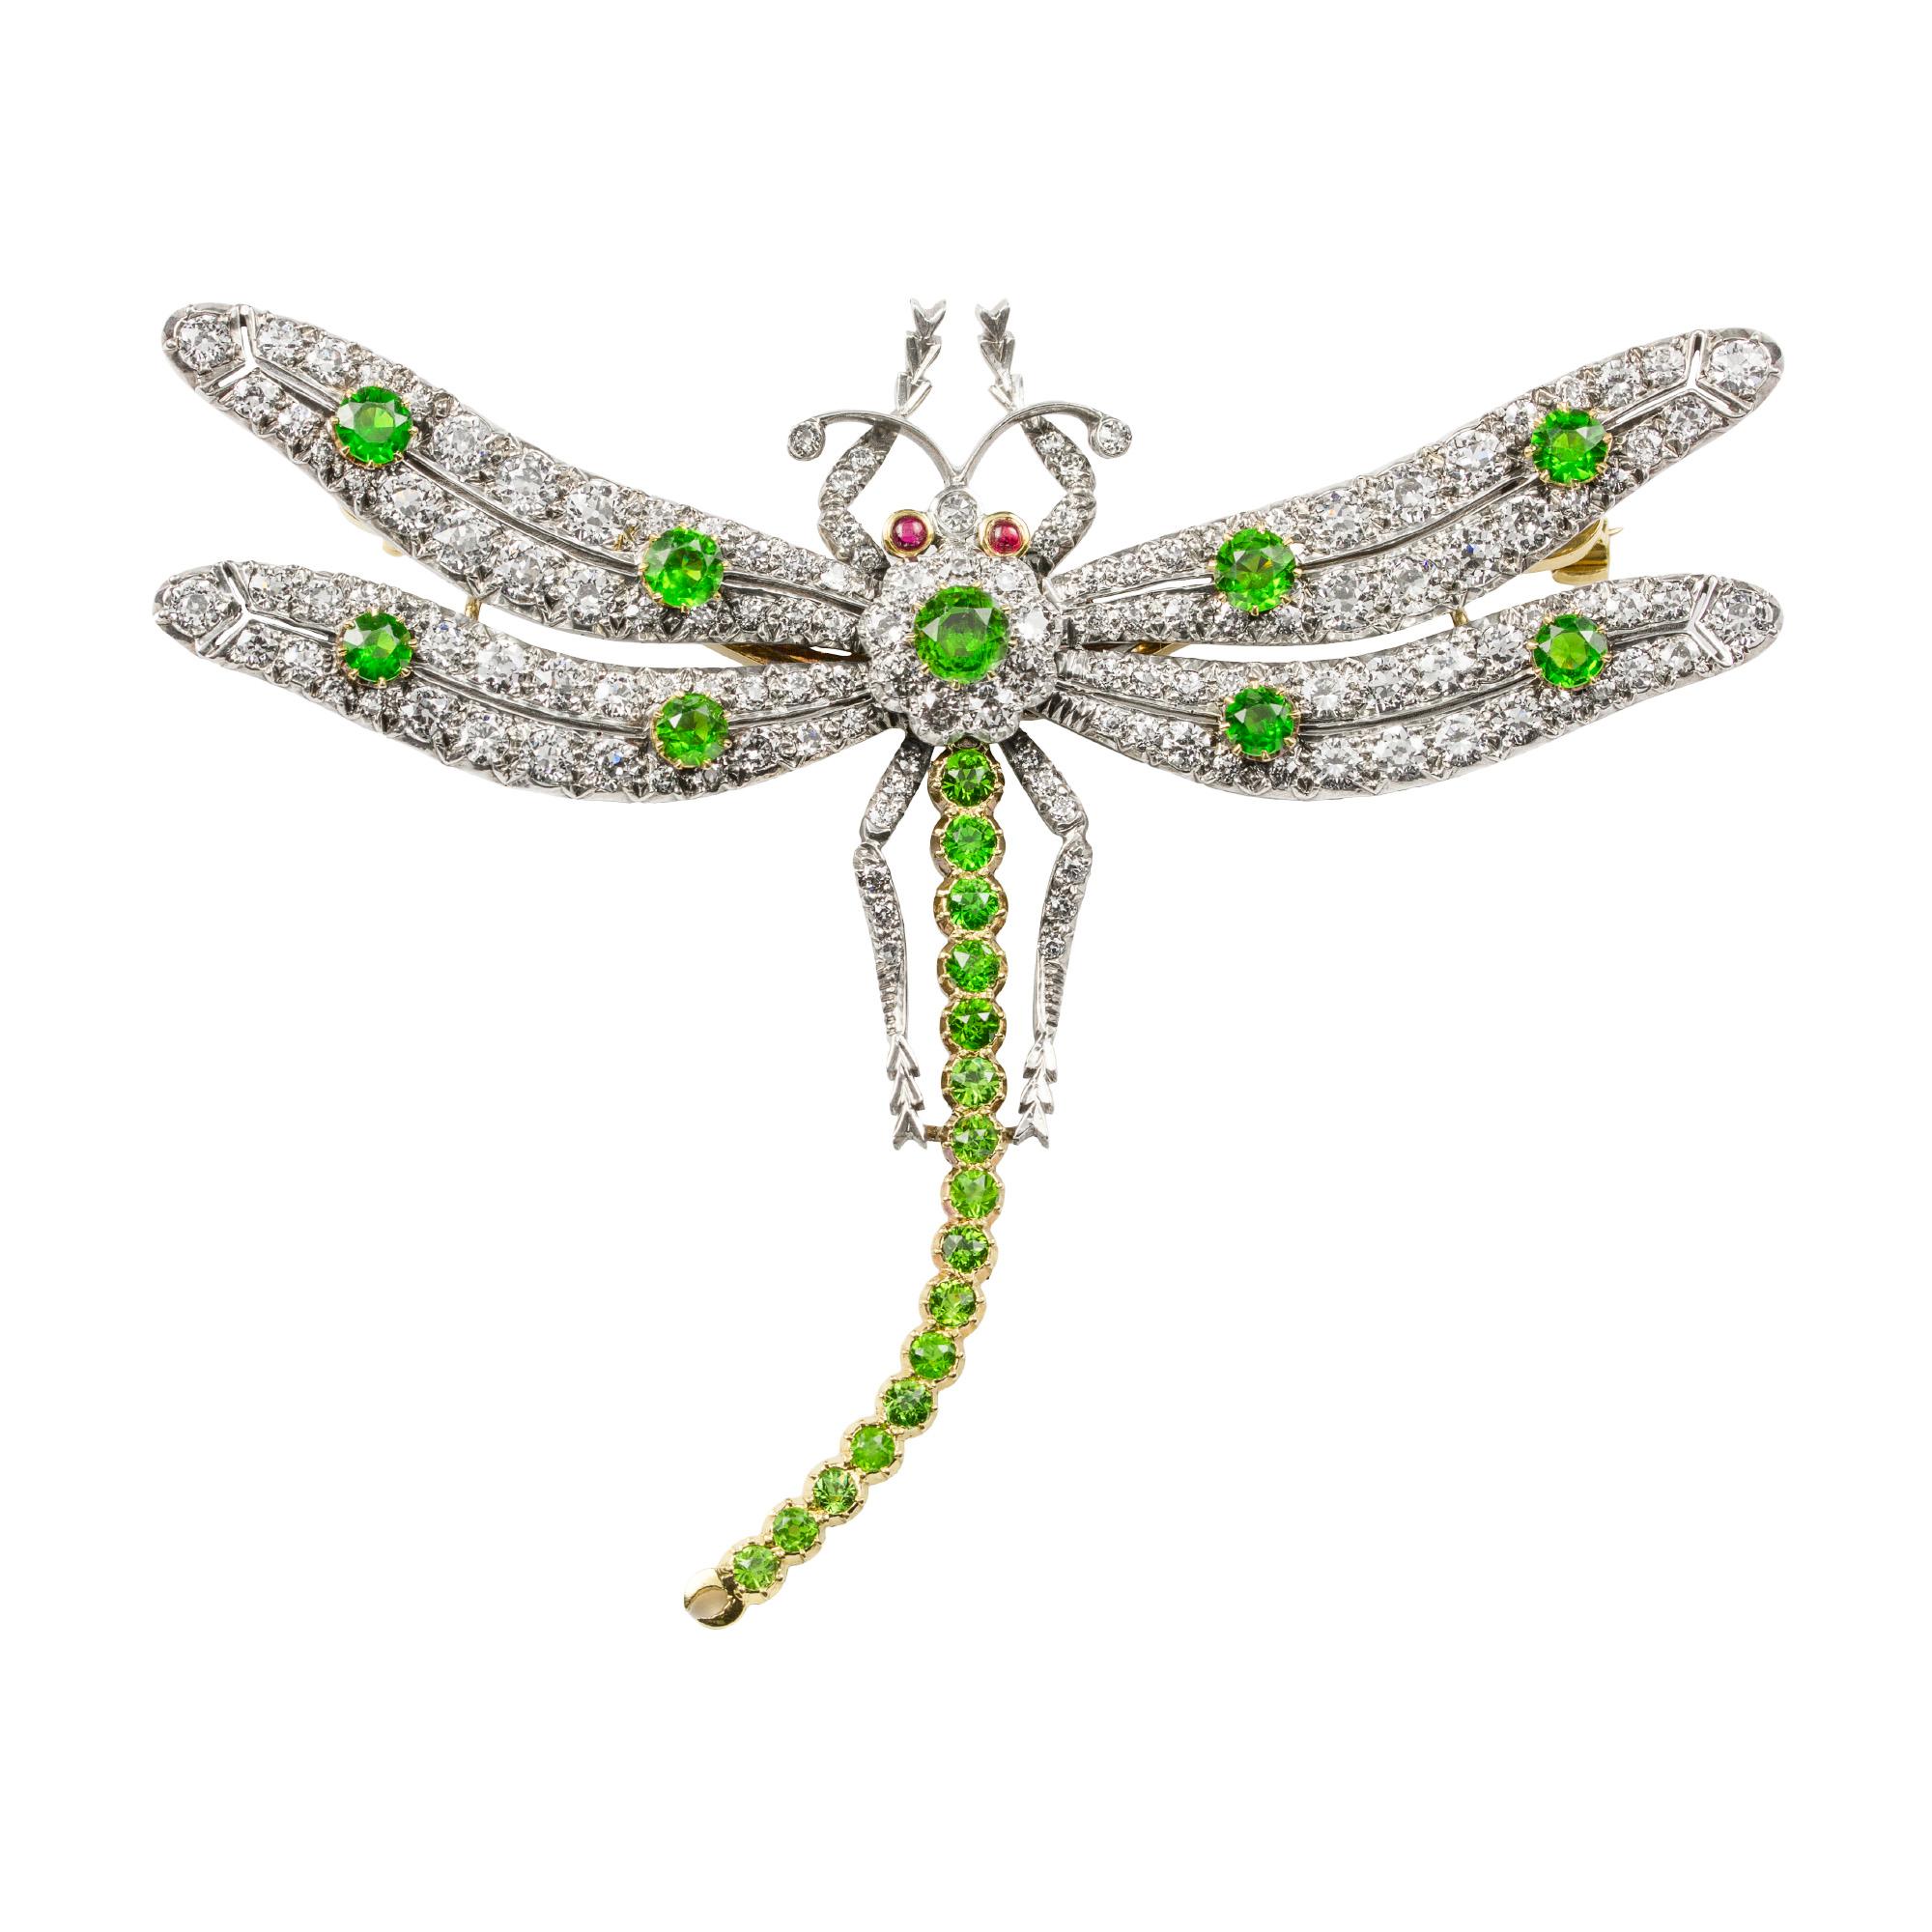 A demantoid garnet and diamond brooch by Bentley & Skinner, in the form of a dragonfly, the en tremblant wings and body encrusted with old brilliant-cut diamonds weighing a total of 6.91 carats, and round faceted dematoid garnets weighing a total of